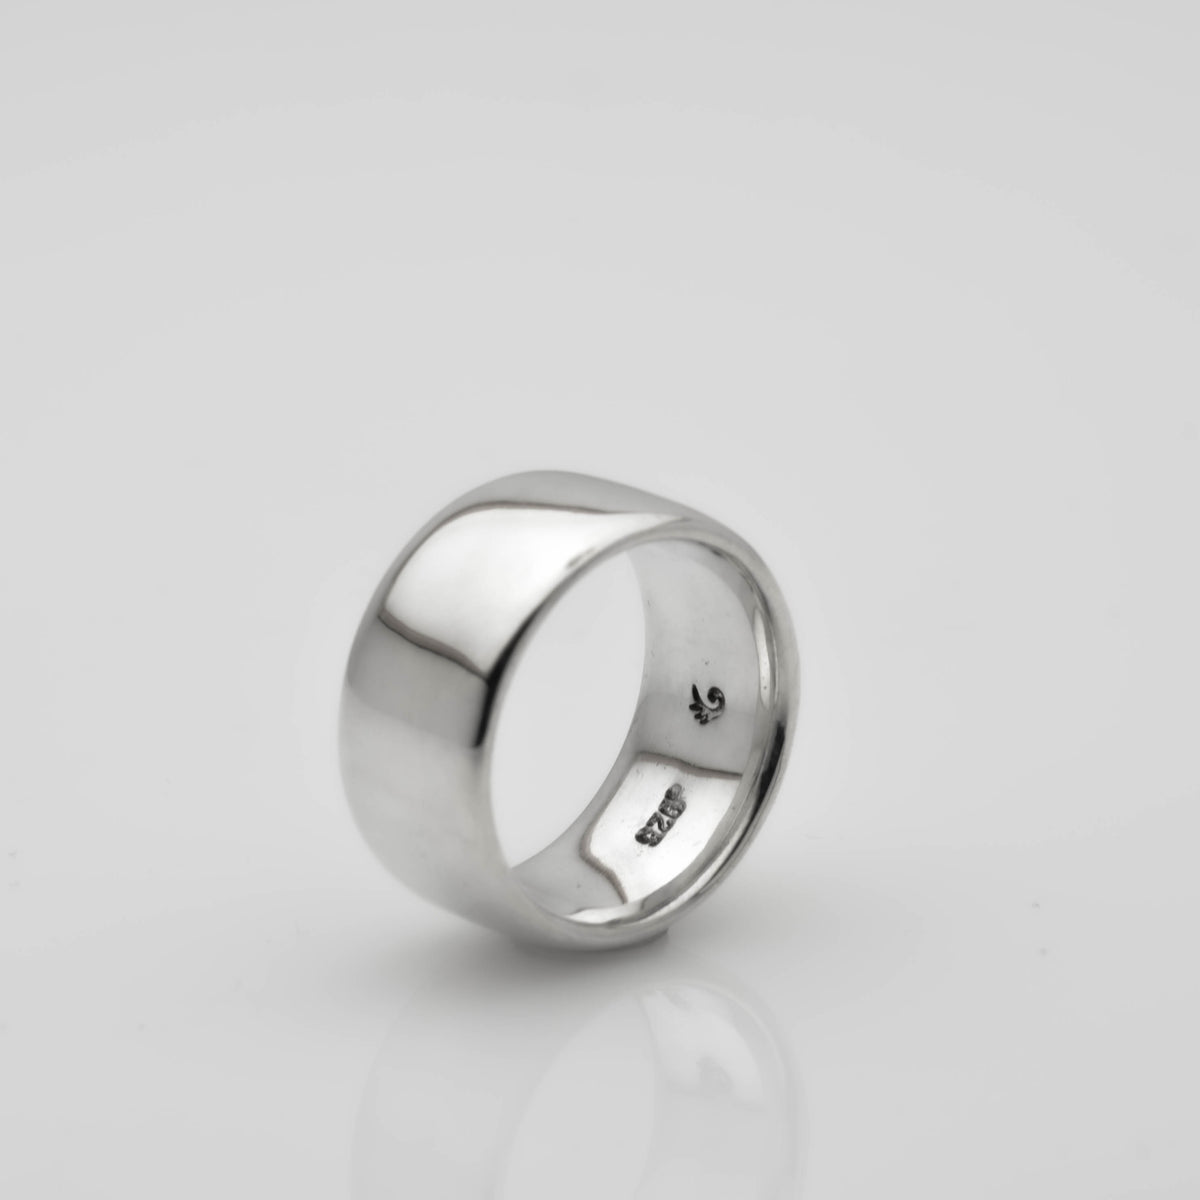 The Sleek and Stylish Sterling Silver Bullet Ring